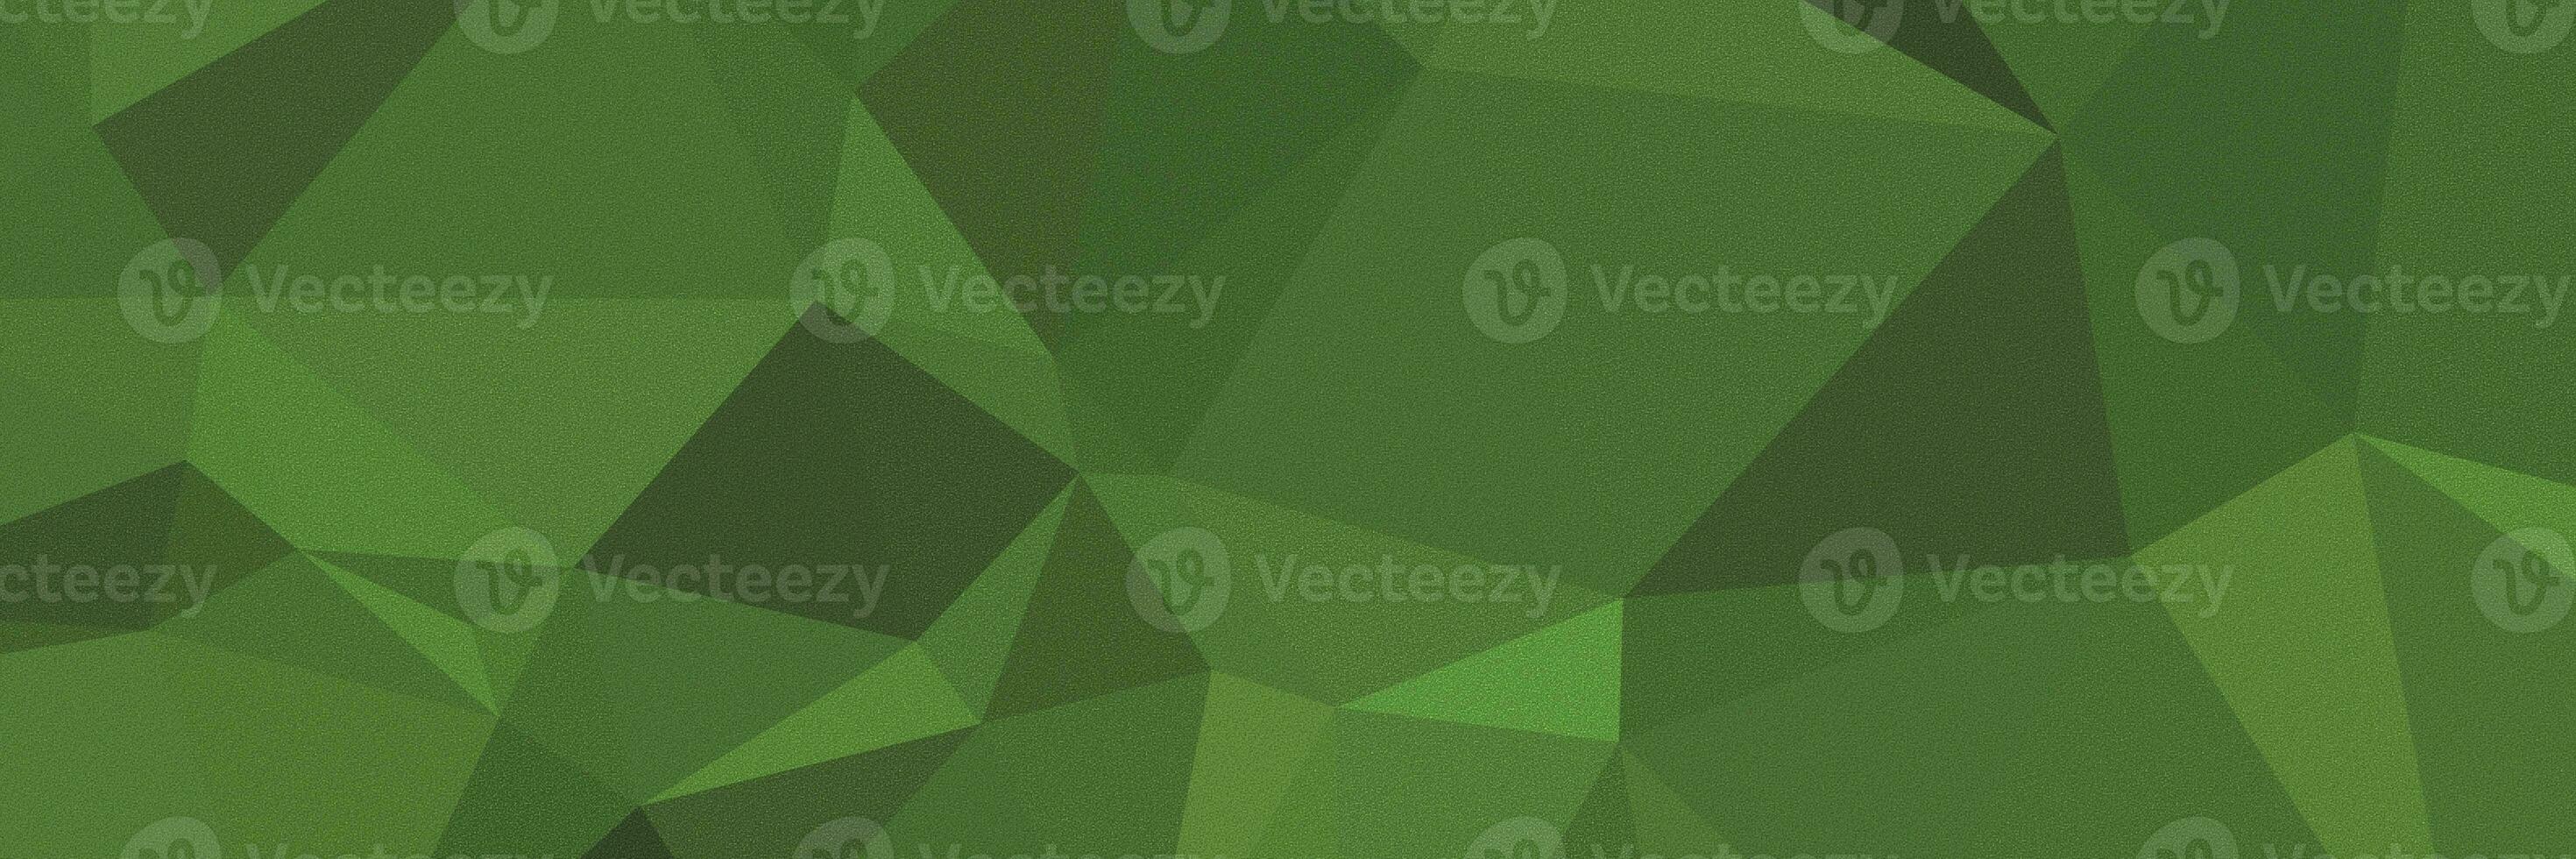 abstract green grainny background with triangles photo